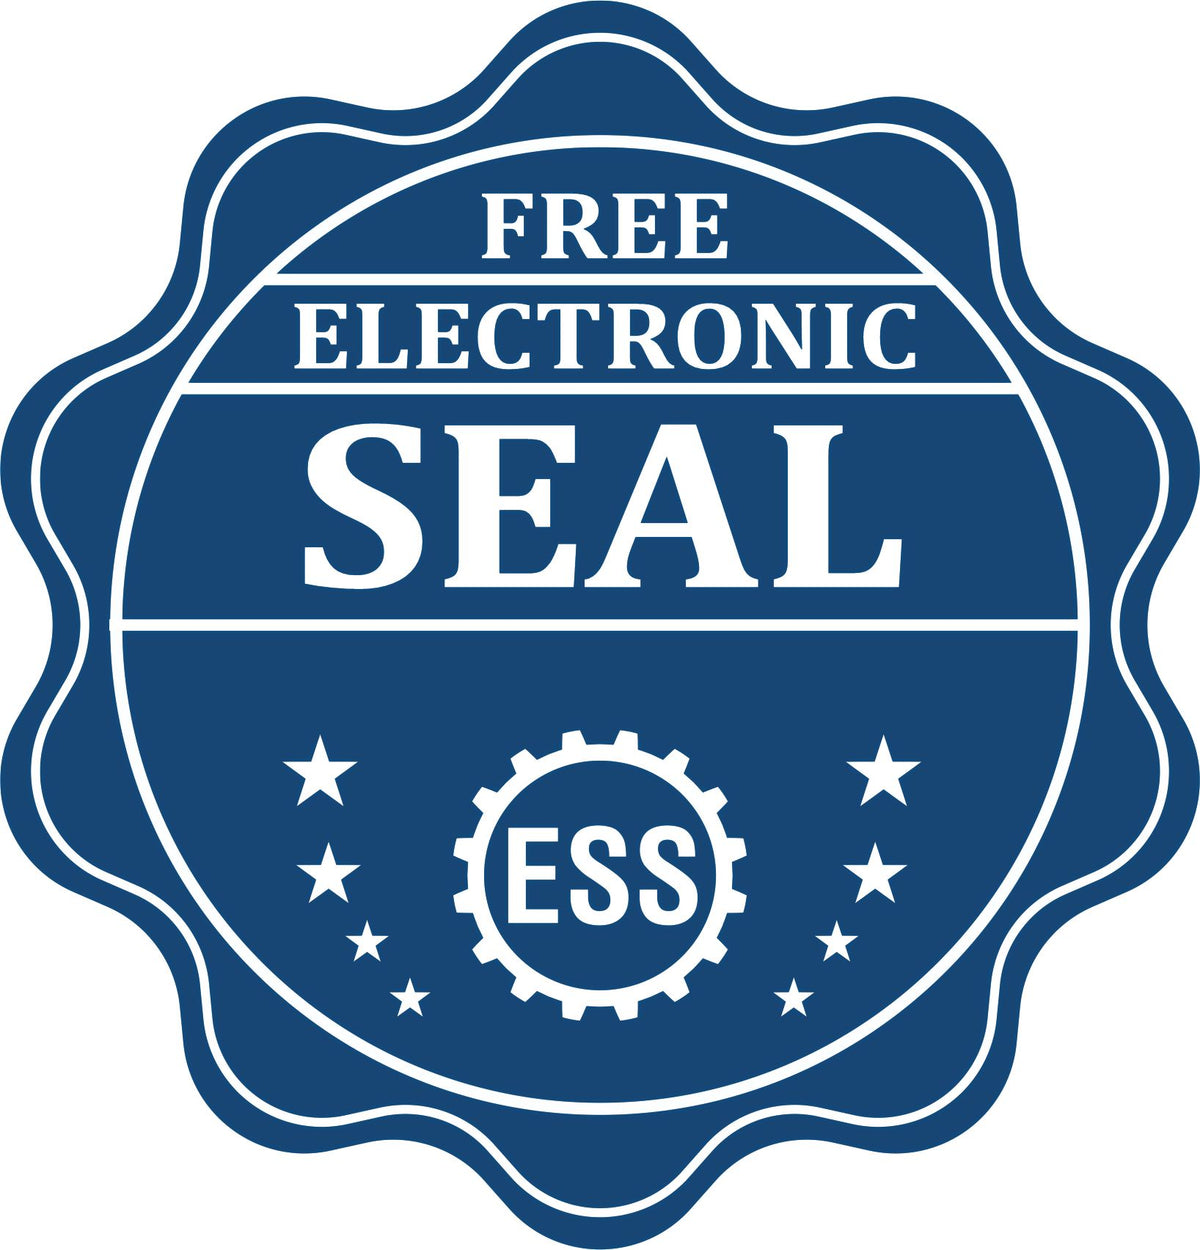 A badge showing a free electronic seal for the State of West Virginia Architectural Seal Embosser with stars and the ESS gear on the emblem.